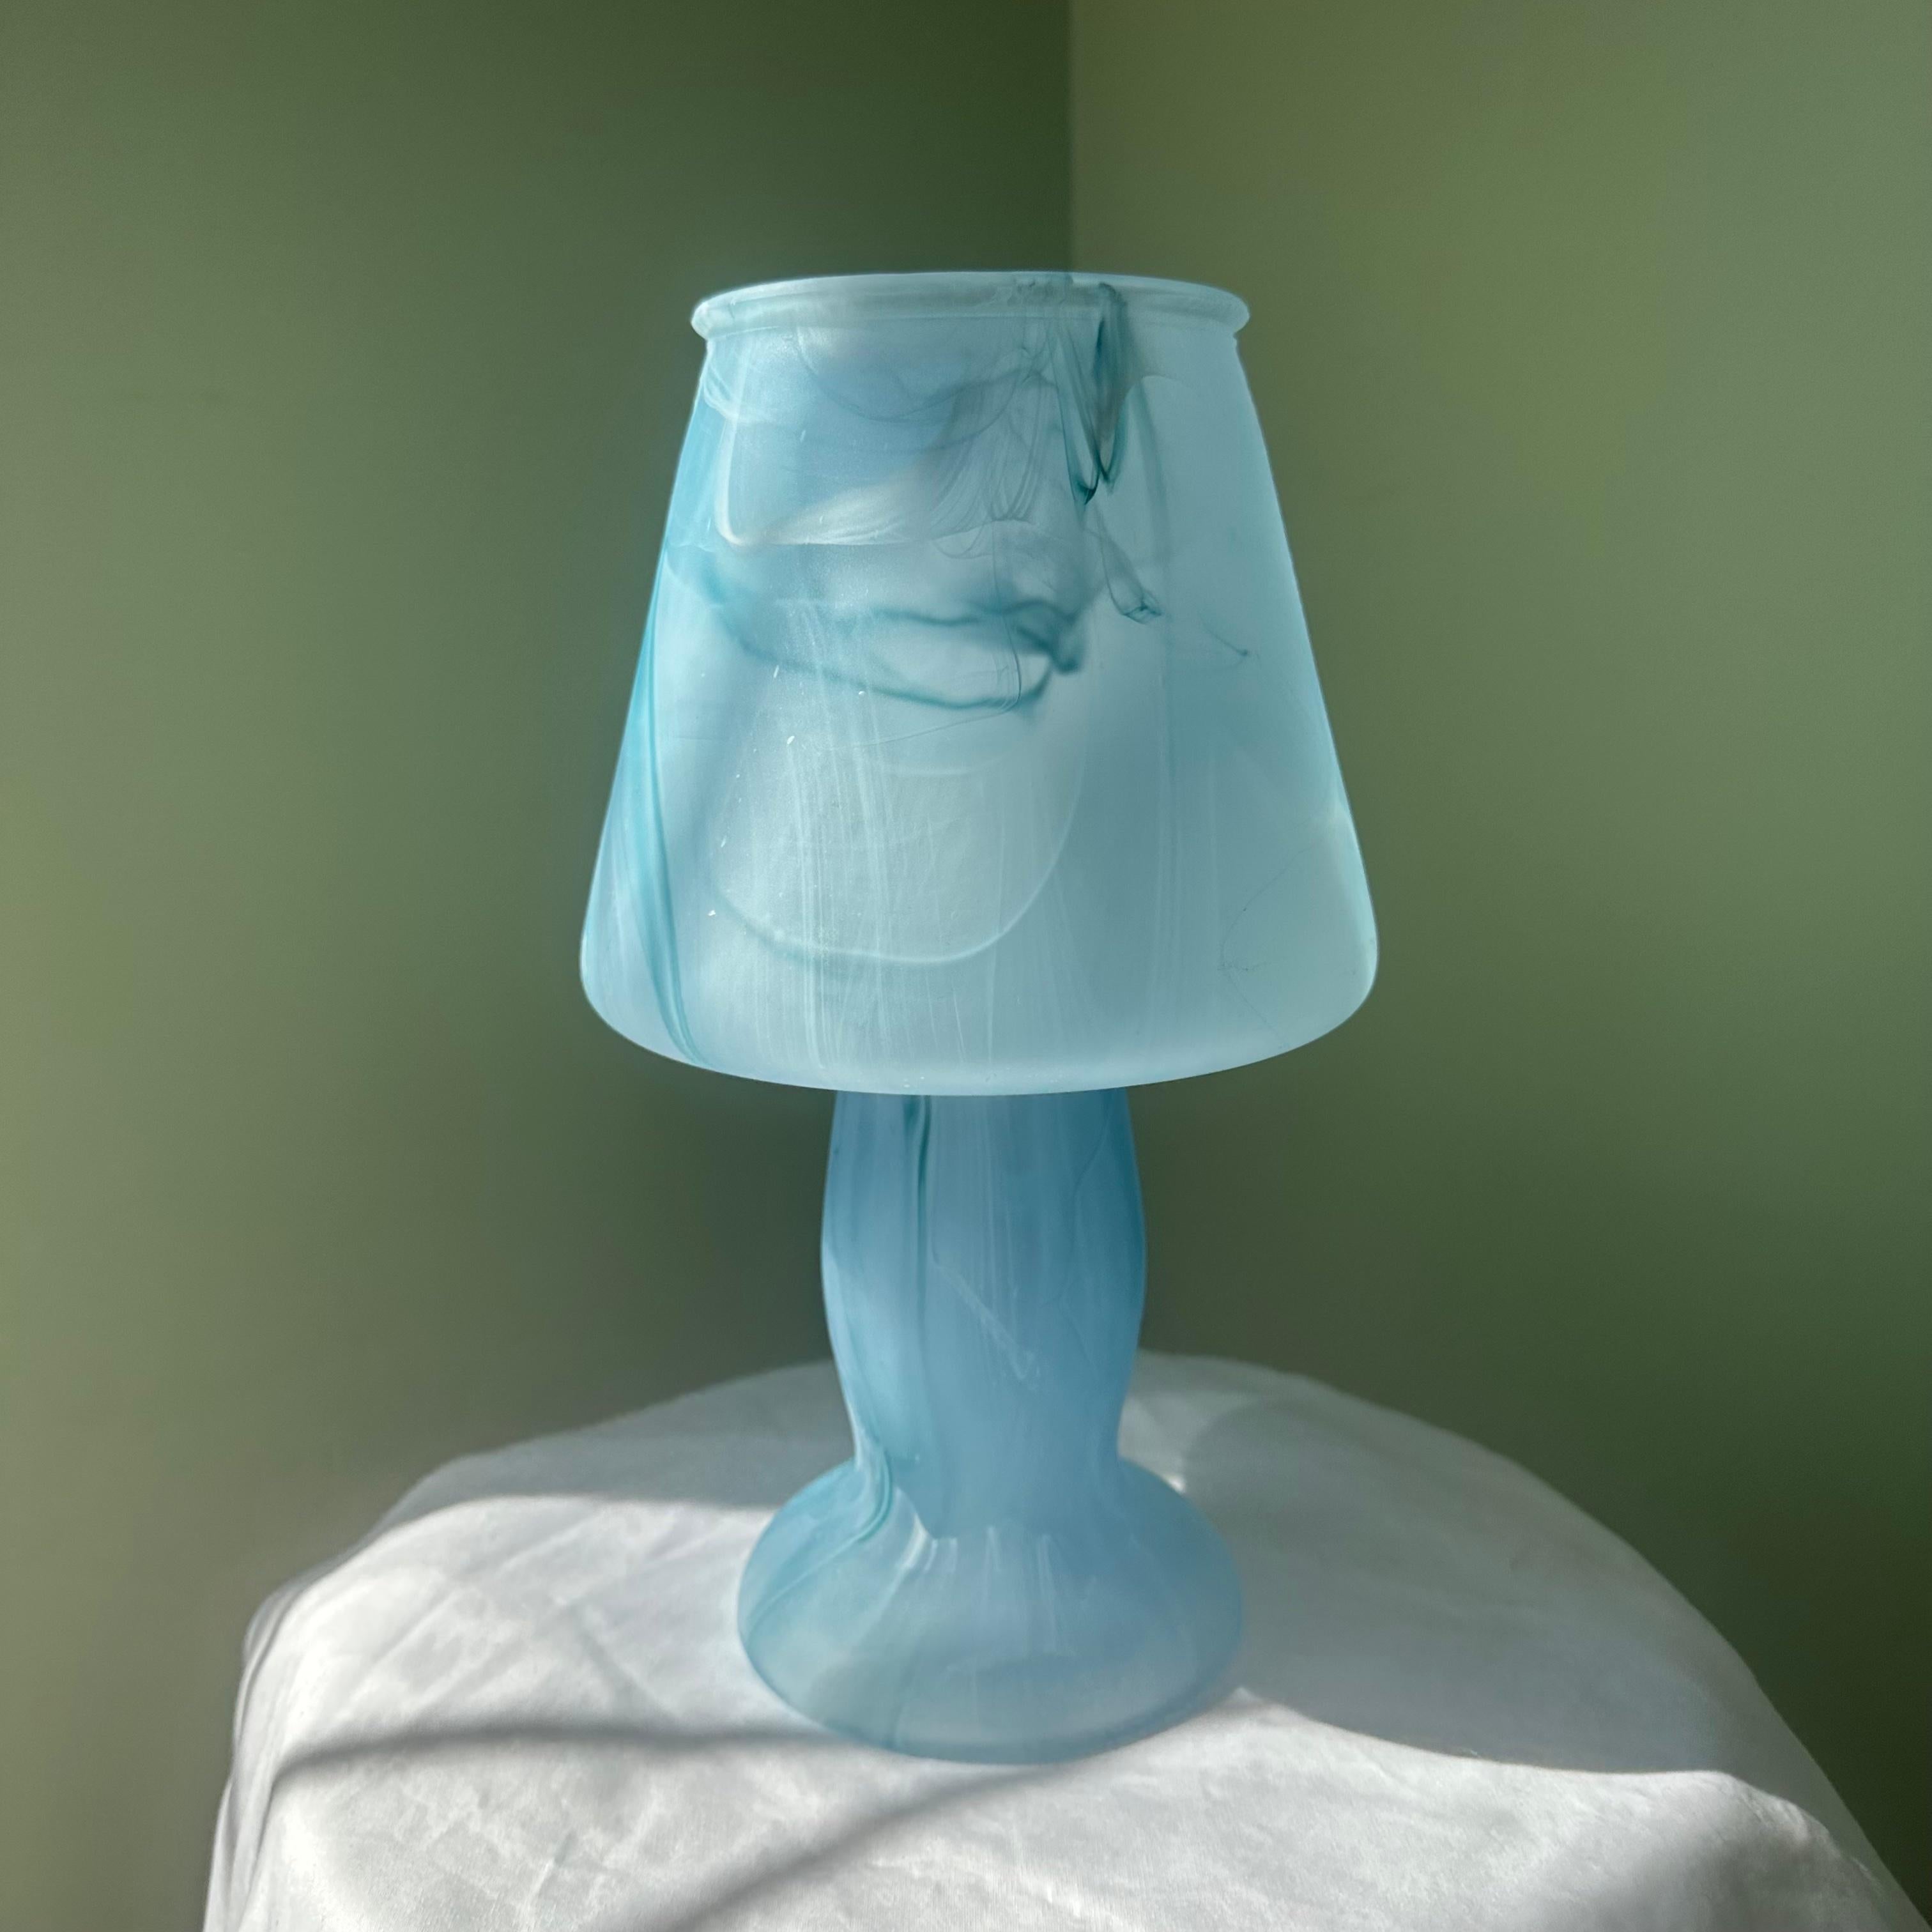 Blue glass mushroom table lamp or desk lamp. Swirling in a tie-dye like pattern, shades of blue mix with touches of white. Molded in a single, solid piece of glass, this lamp is open at the top. An absolutely gorgeous piece of colored glass. Uses